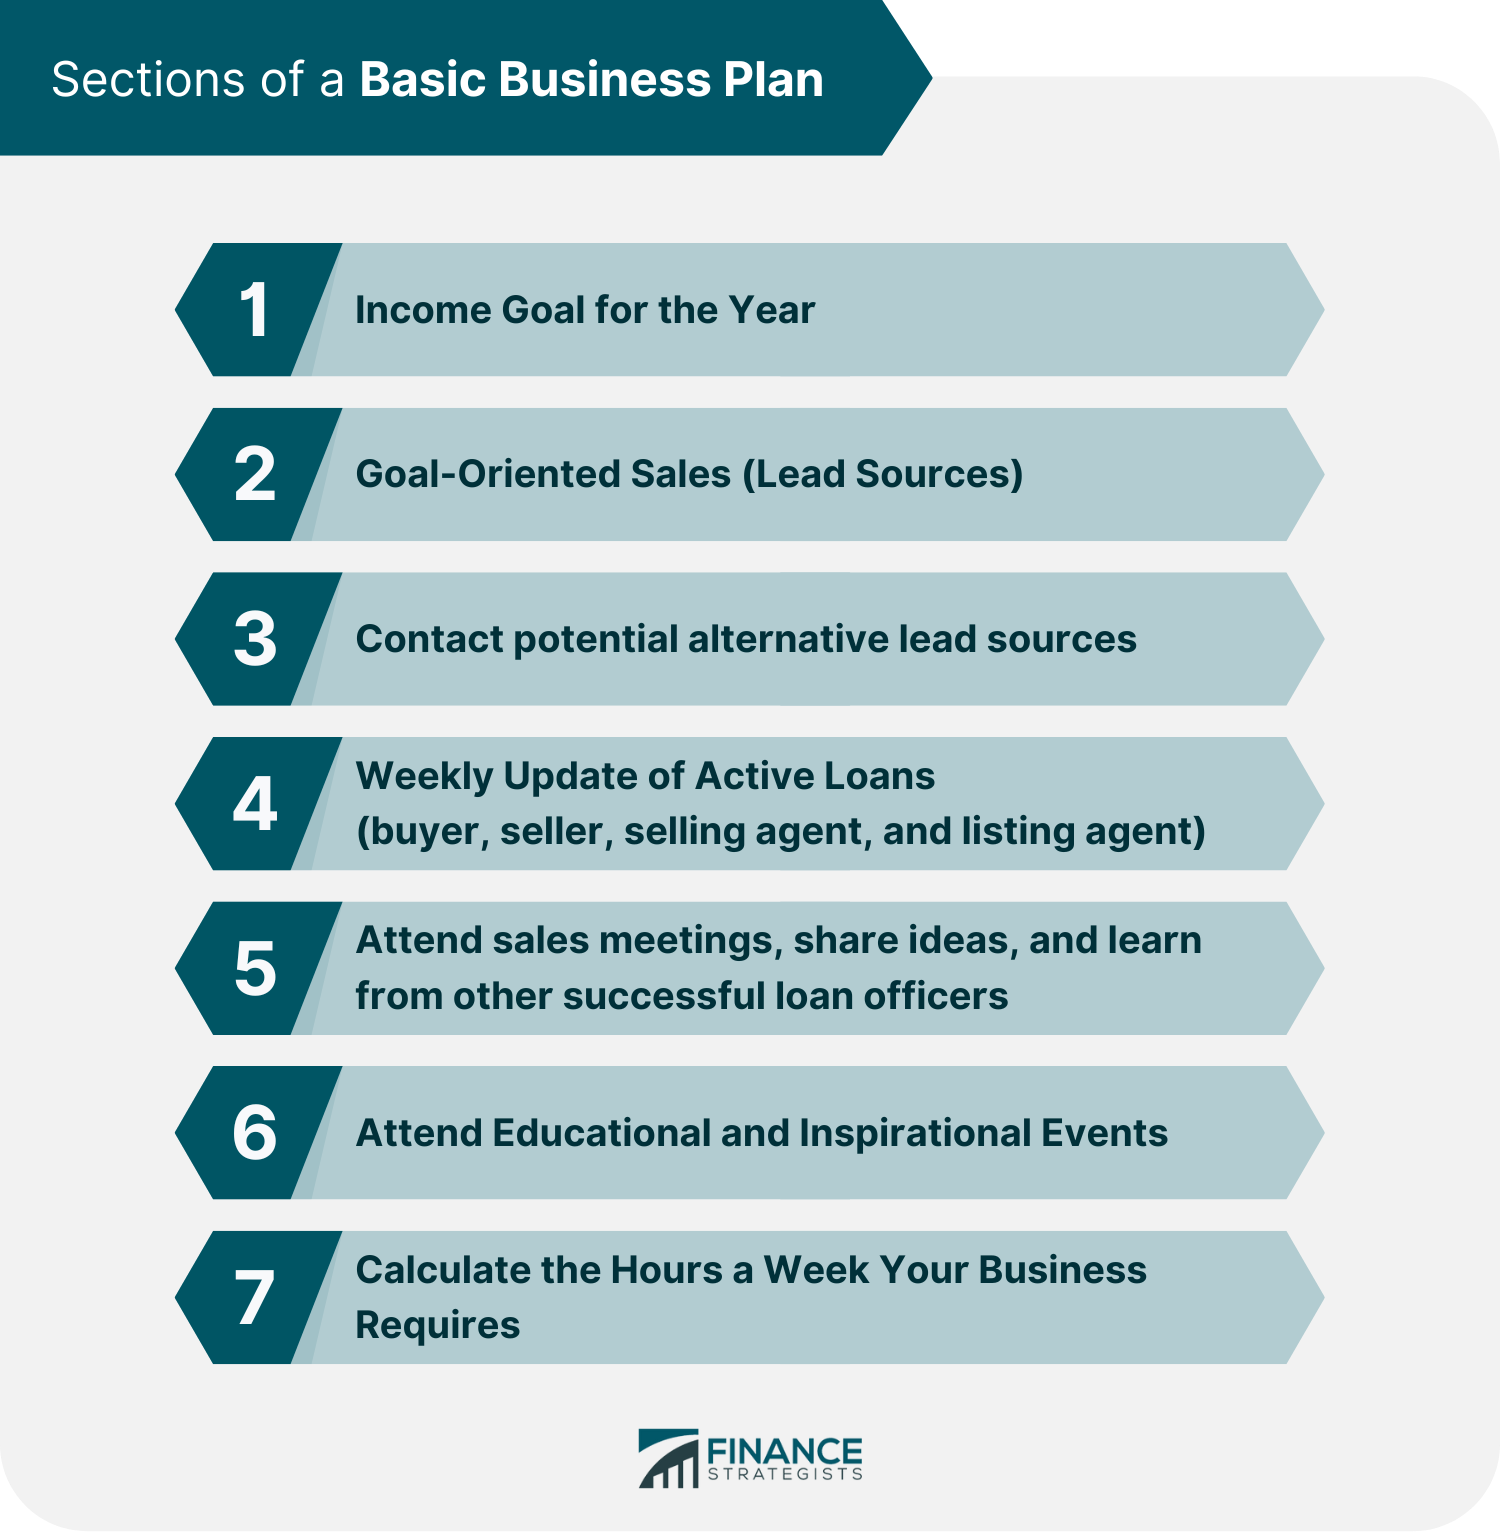 Sections of a Basic Business Plan